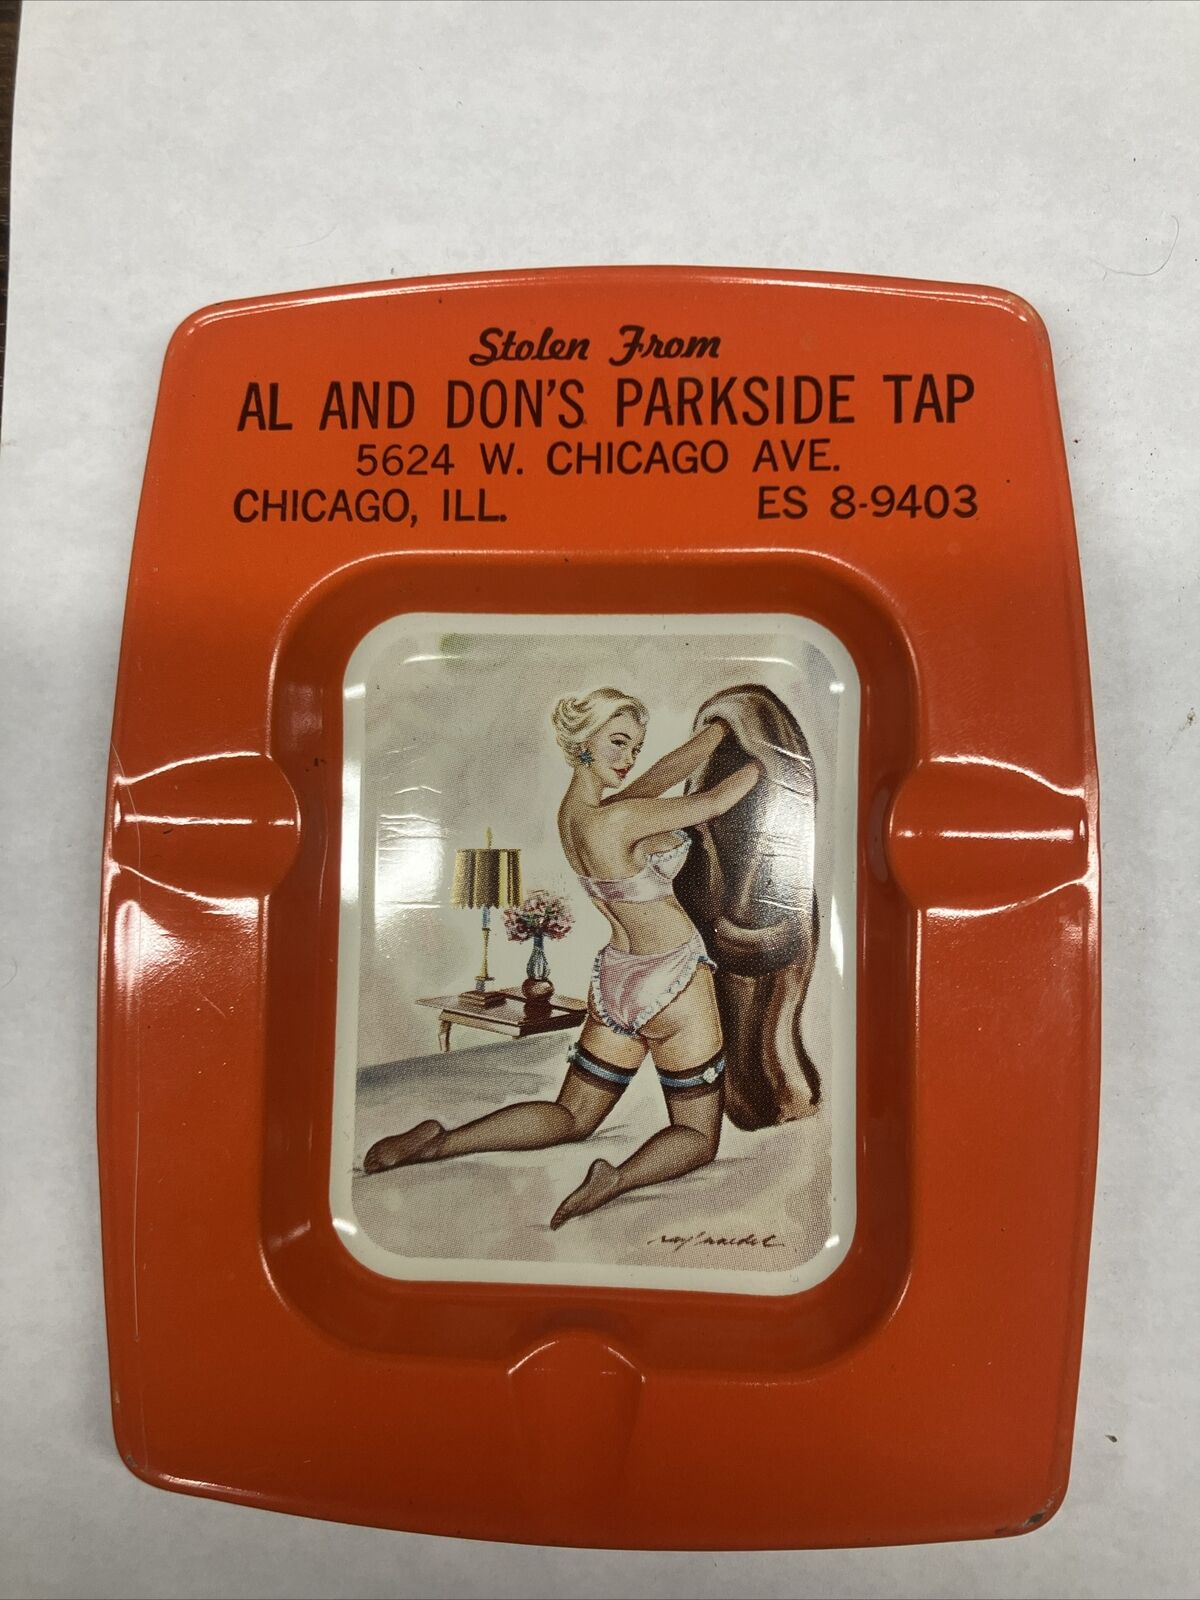 Vintage Semi-Nude Risqué Ashtray “Stolen From Al And Don’s Parkside Tap” Chicago